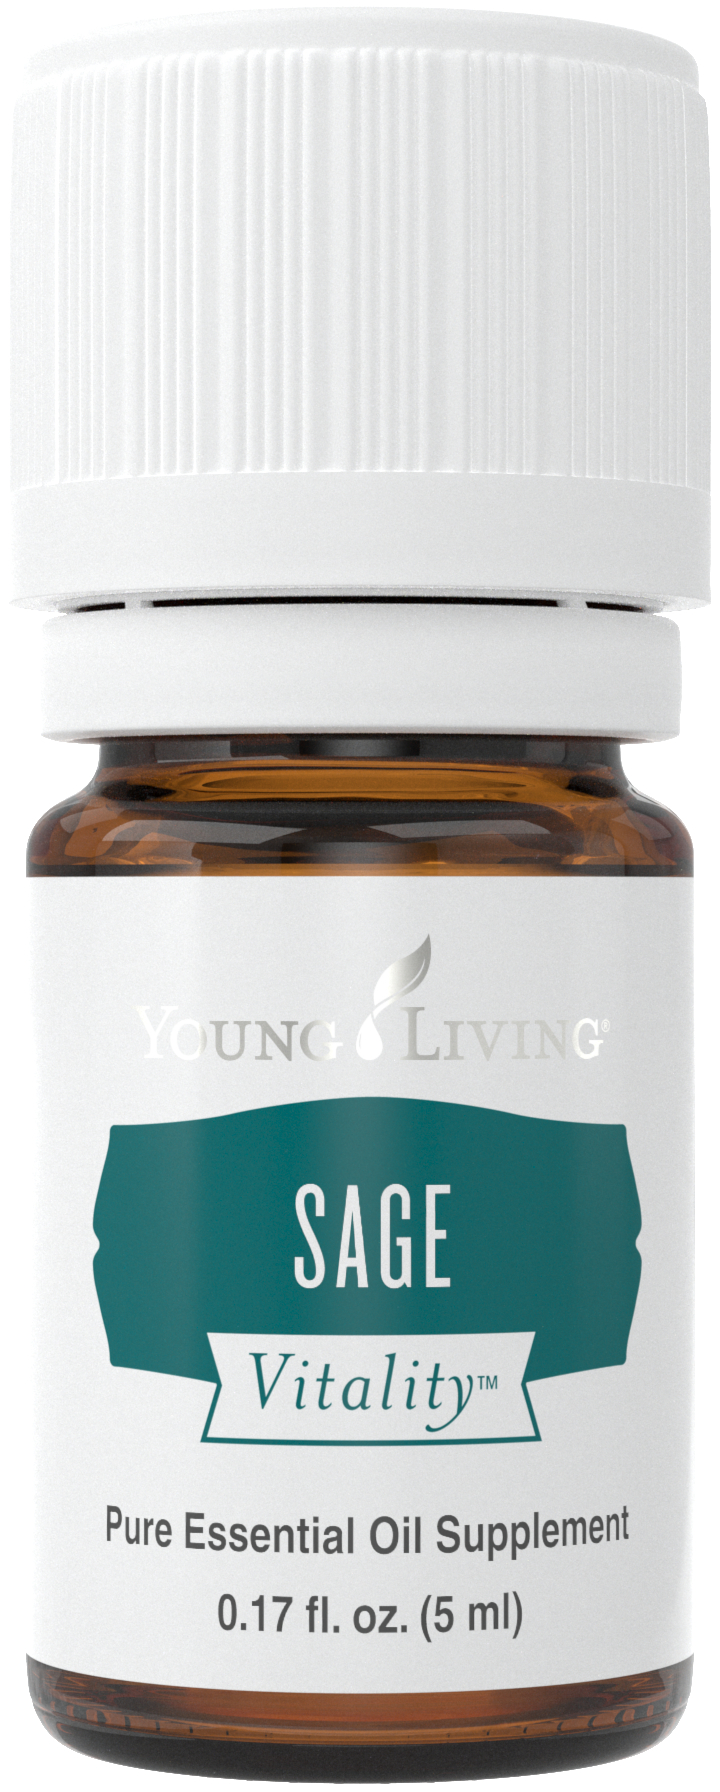 Sage Vitality Essential Oil - Young Living Essential Oils 